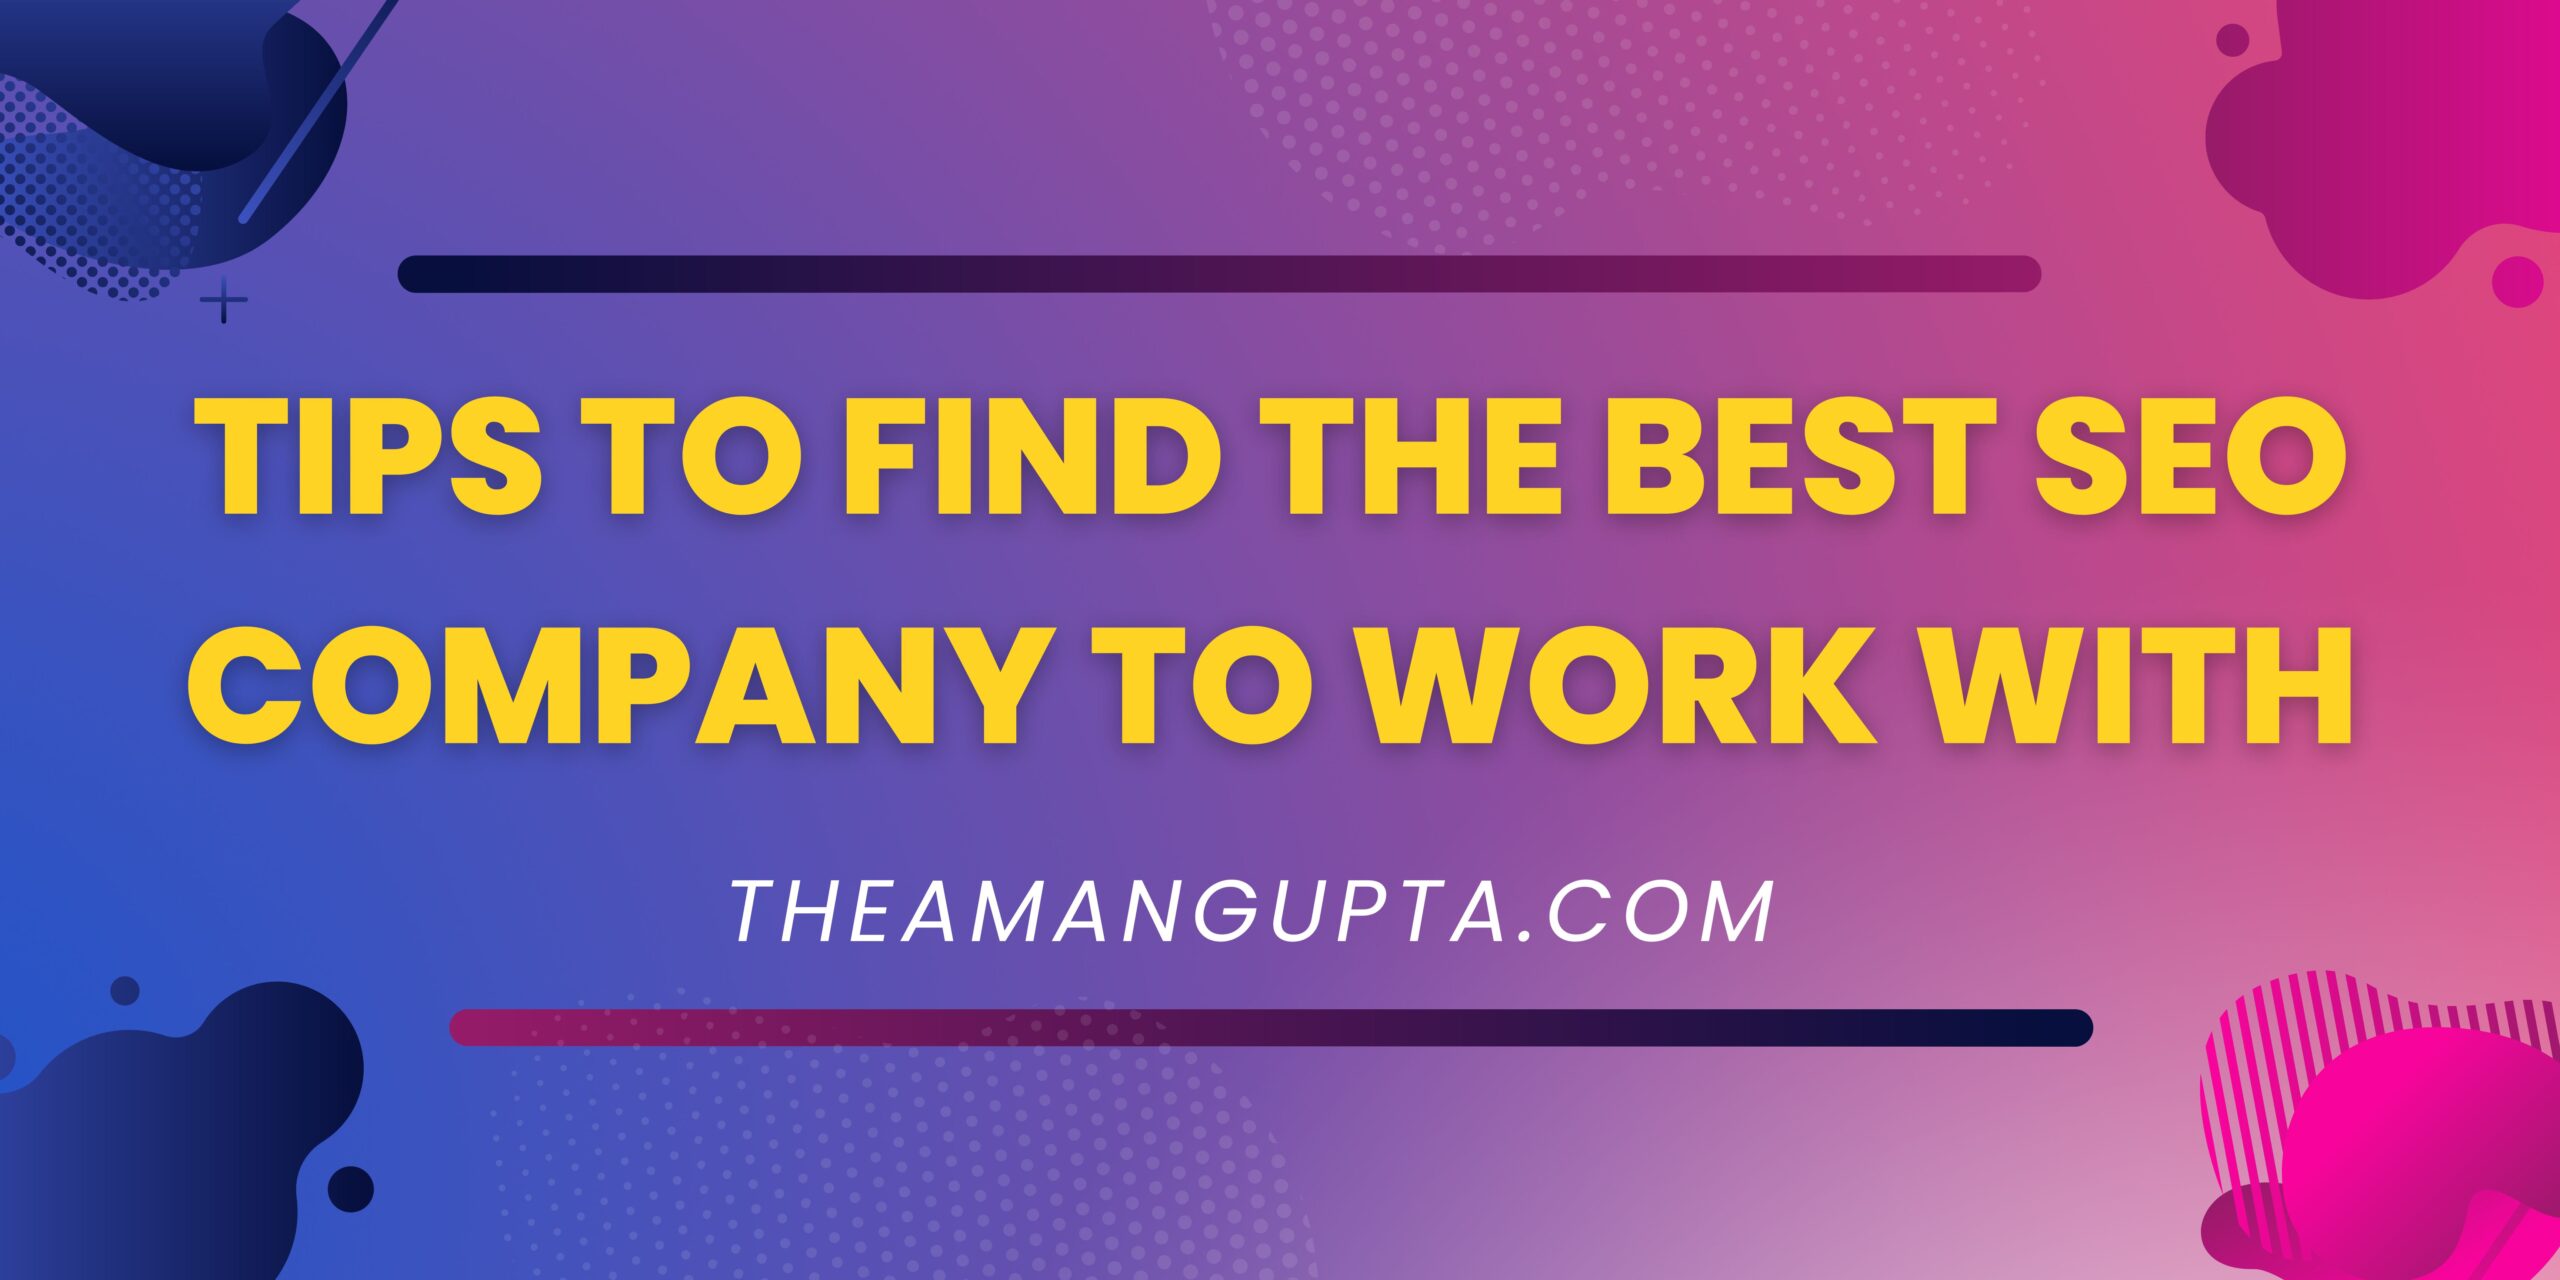 Tips To Find The Best SEO Company To Work With|SEO|Theamangupta|Theamangupta